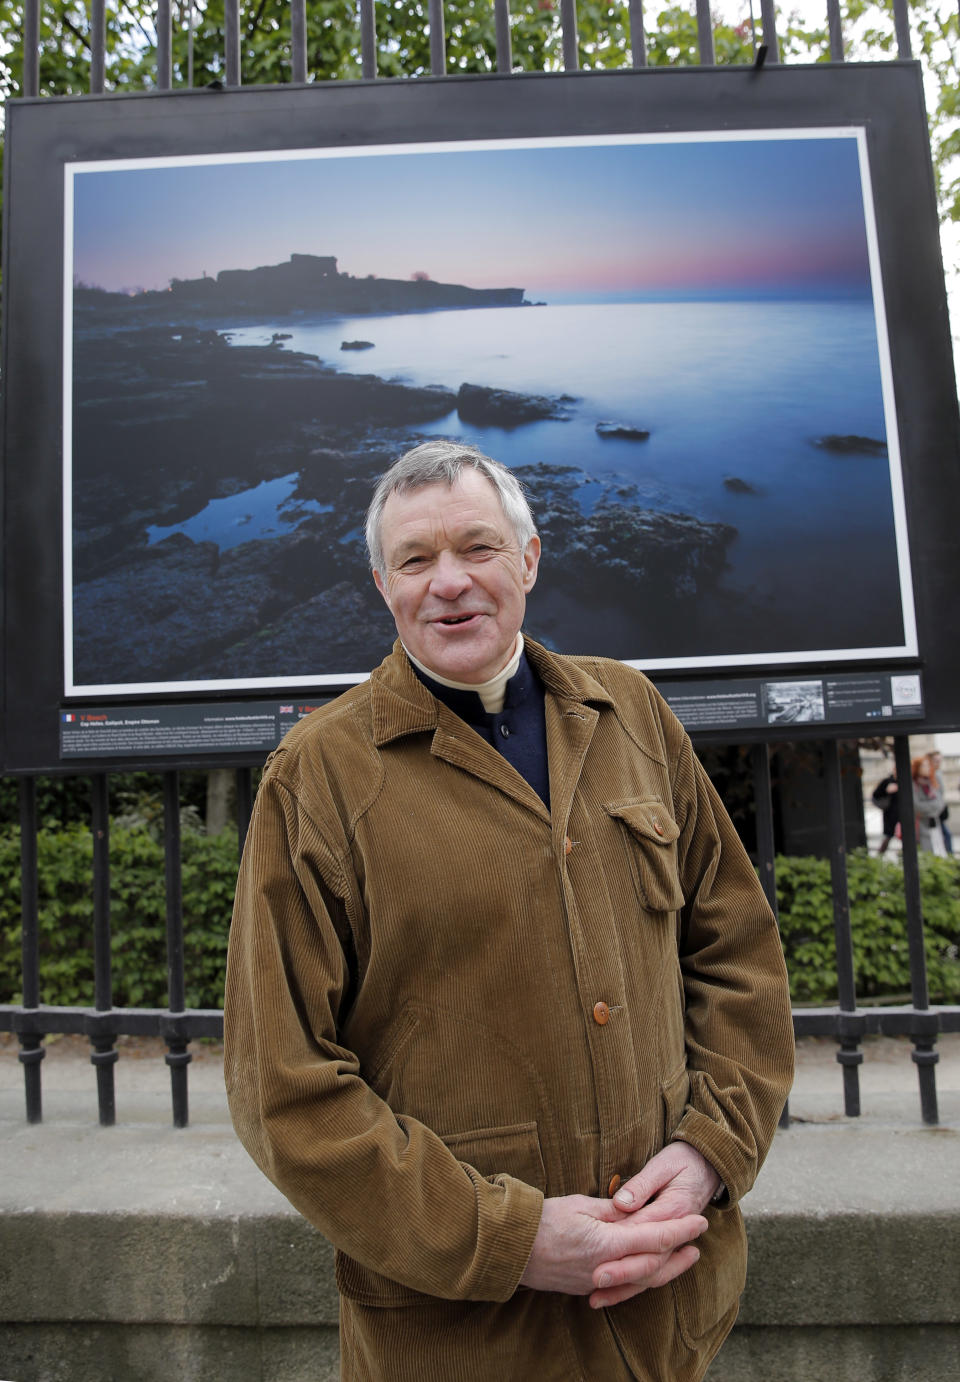 British photographer Michael St Maur Sheil poses in front of one of his pictures displayed at the Paris Luxembourg gardens, Tuesday, April 8, 2014, as part of an exhibition " Fields of Battle - Lands of Peace 14-18 ". The picture displayed is a modern take at the location of the Cape Helles landings on the Gallipoli peninsula. Captured over a period of seven years, Michael’s photography combines a passion for history and landscape and presents a unique reflection on the transformation of the battlefields of the Great War into the landscape of modern Europe. (AP Photo/Christophe Ena)